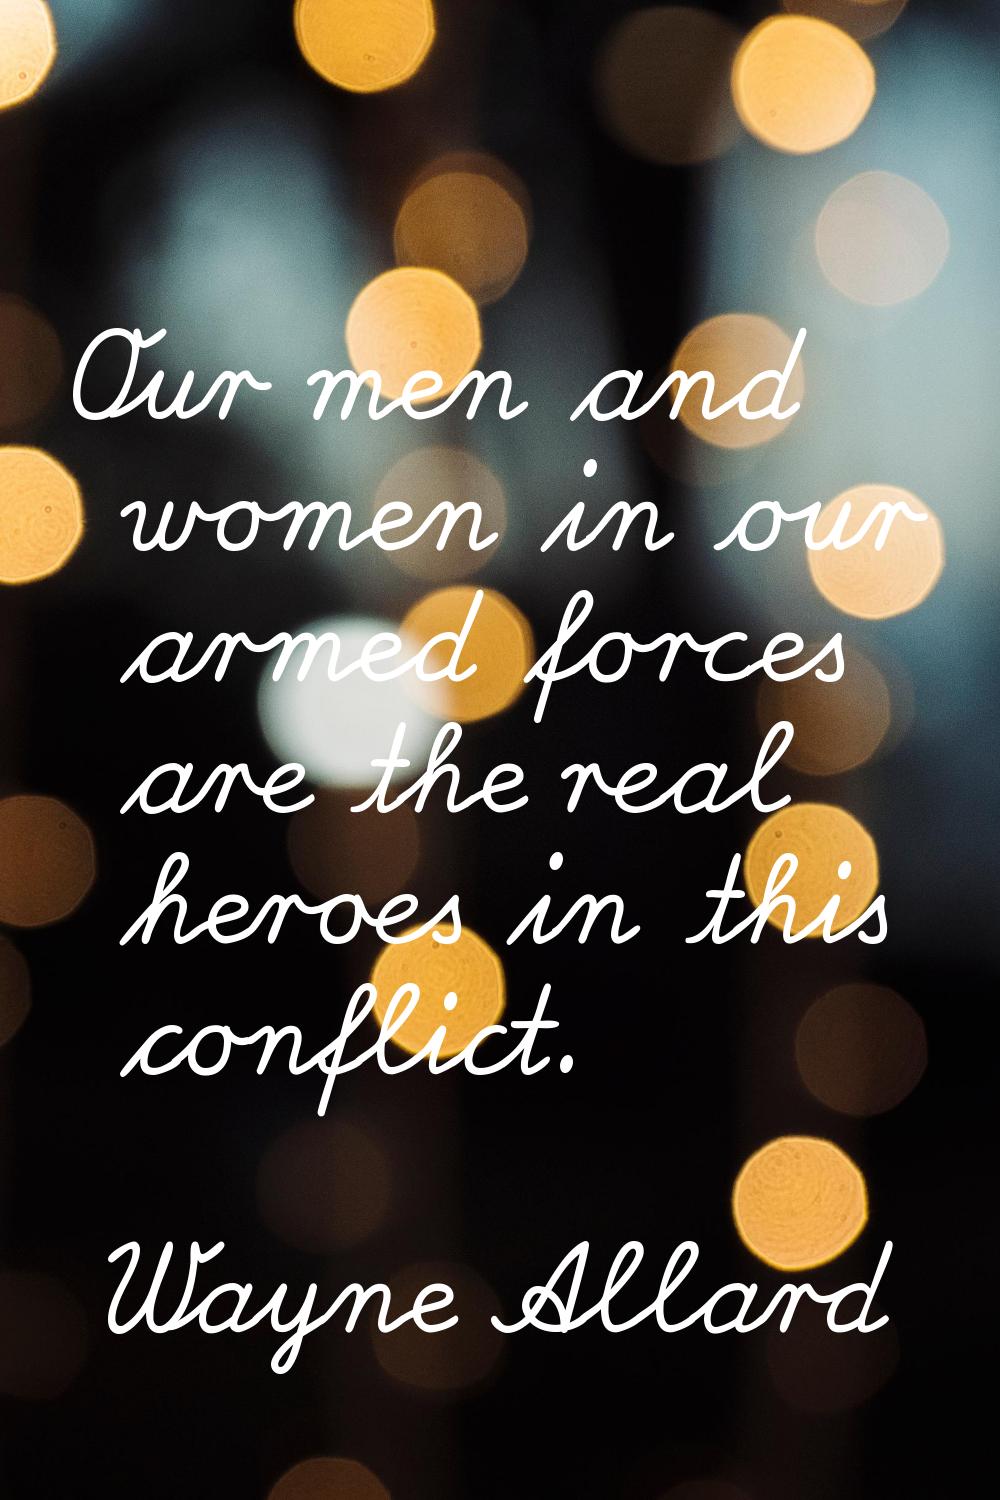 Our men and women in our armed forces are the real heroes in this conflict.